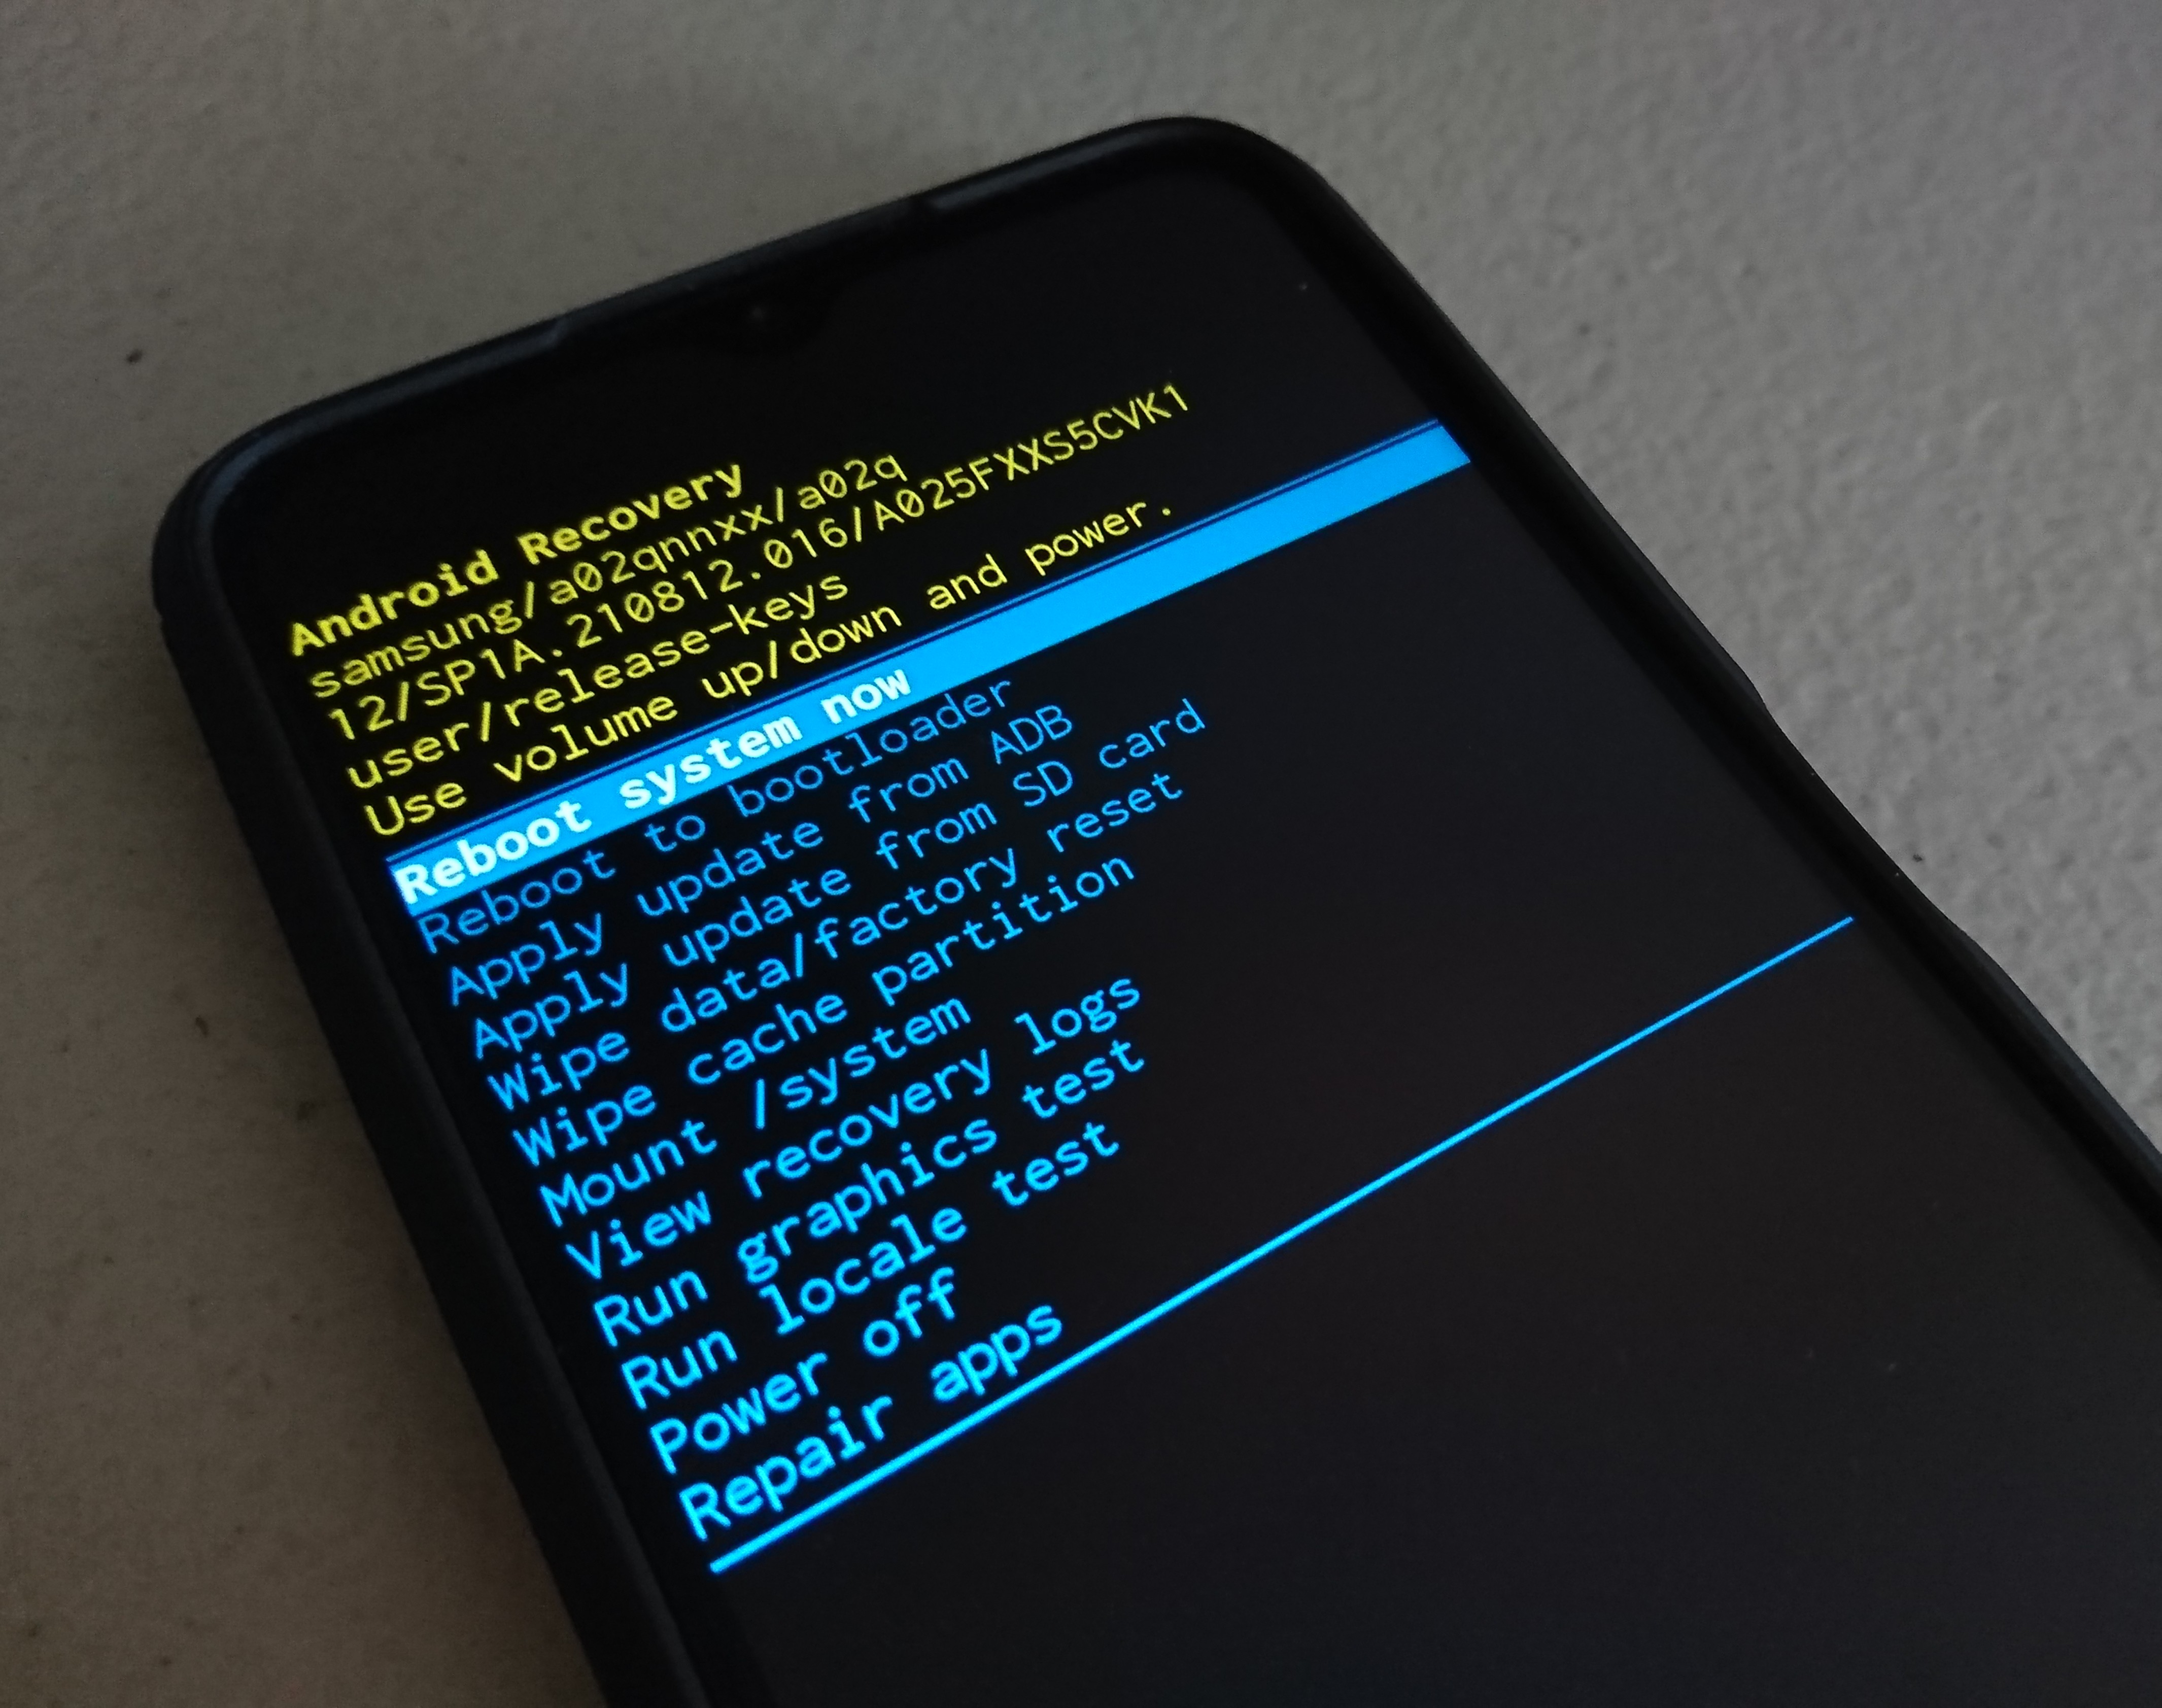 Android factory reset screen